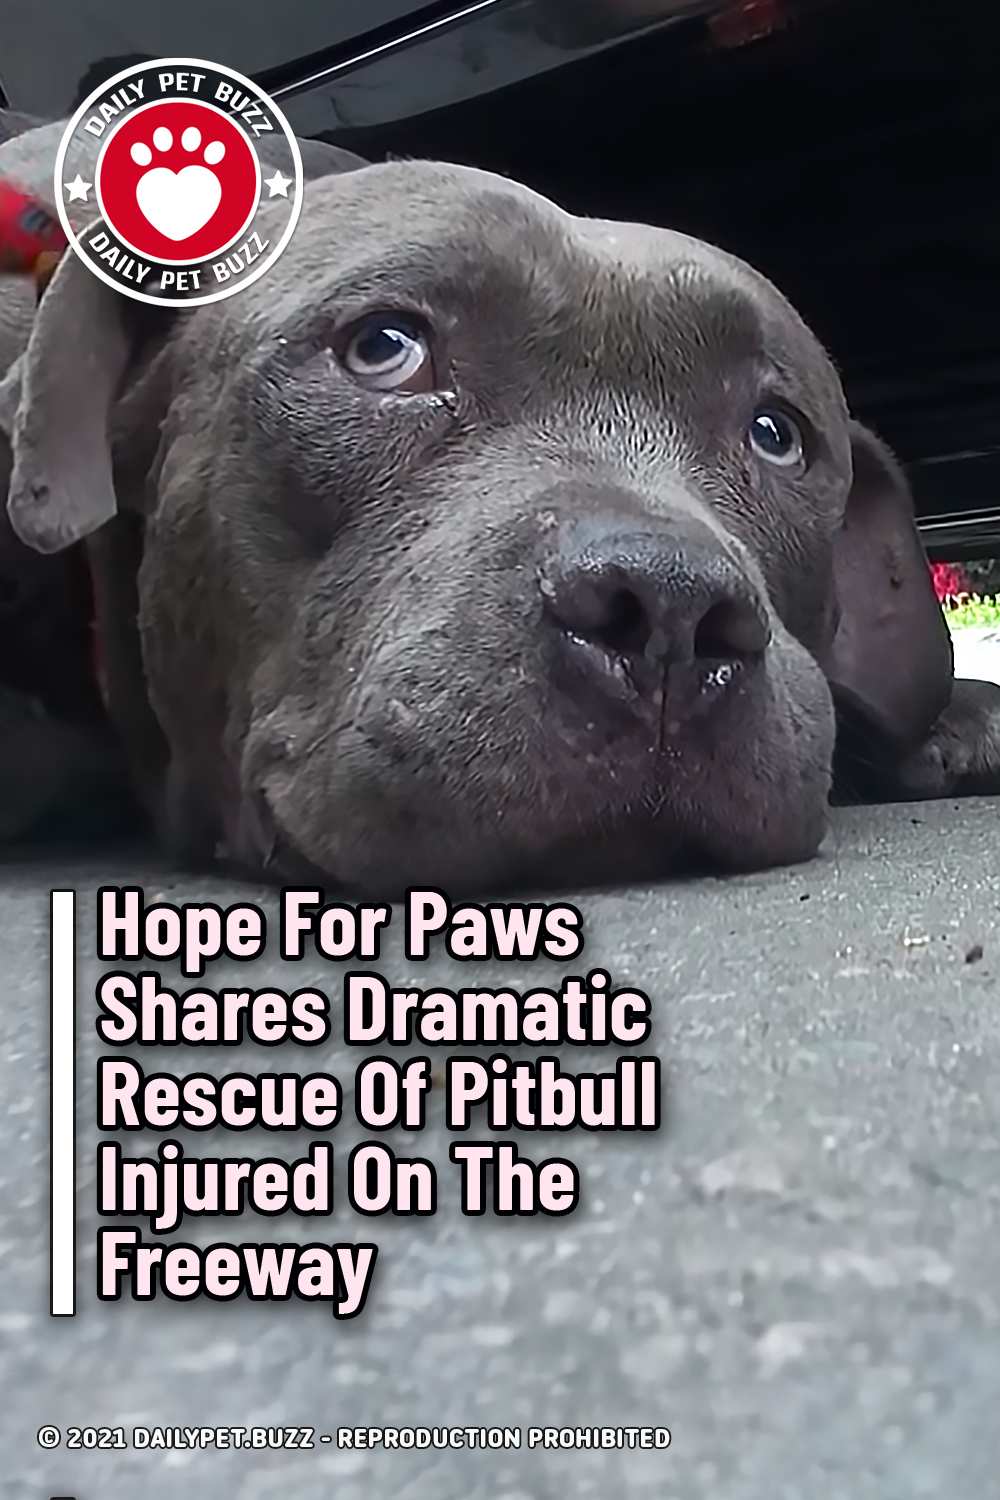 Hope For Paws Shares Dramatic Rescue Of Pitbull Injured On The Freeway